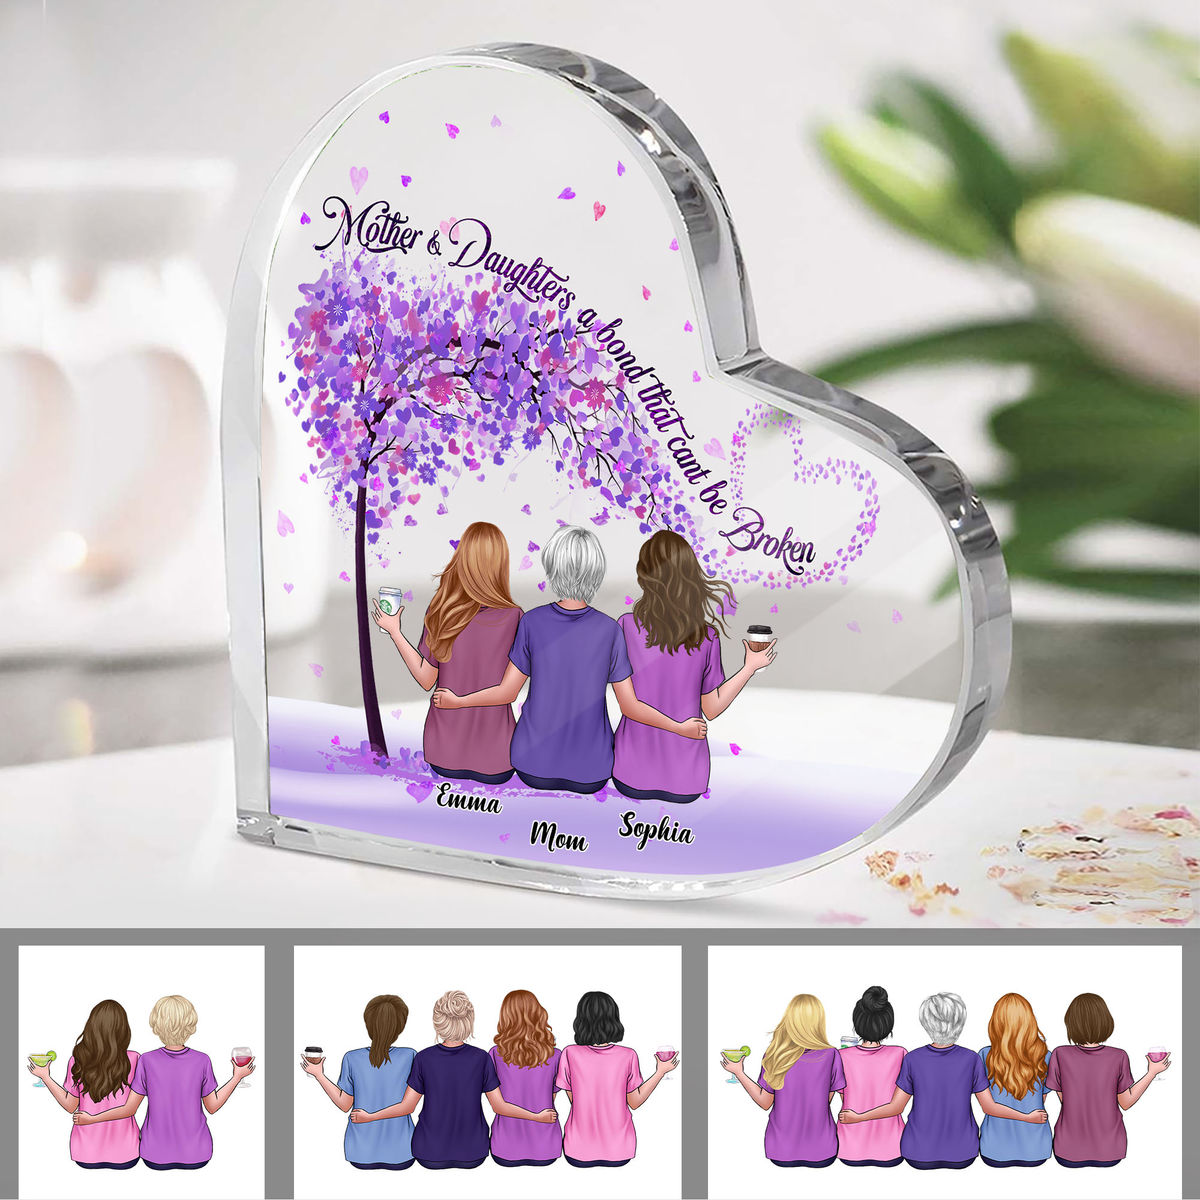 Personalized Desktop - Heart Transparent Plaque - The love between a mother and Daughters is forever (23521)_1